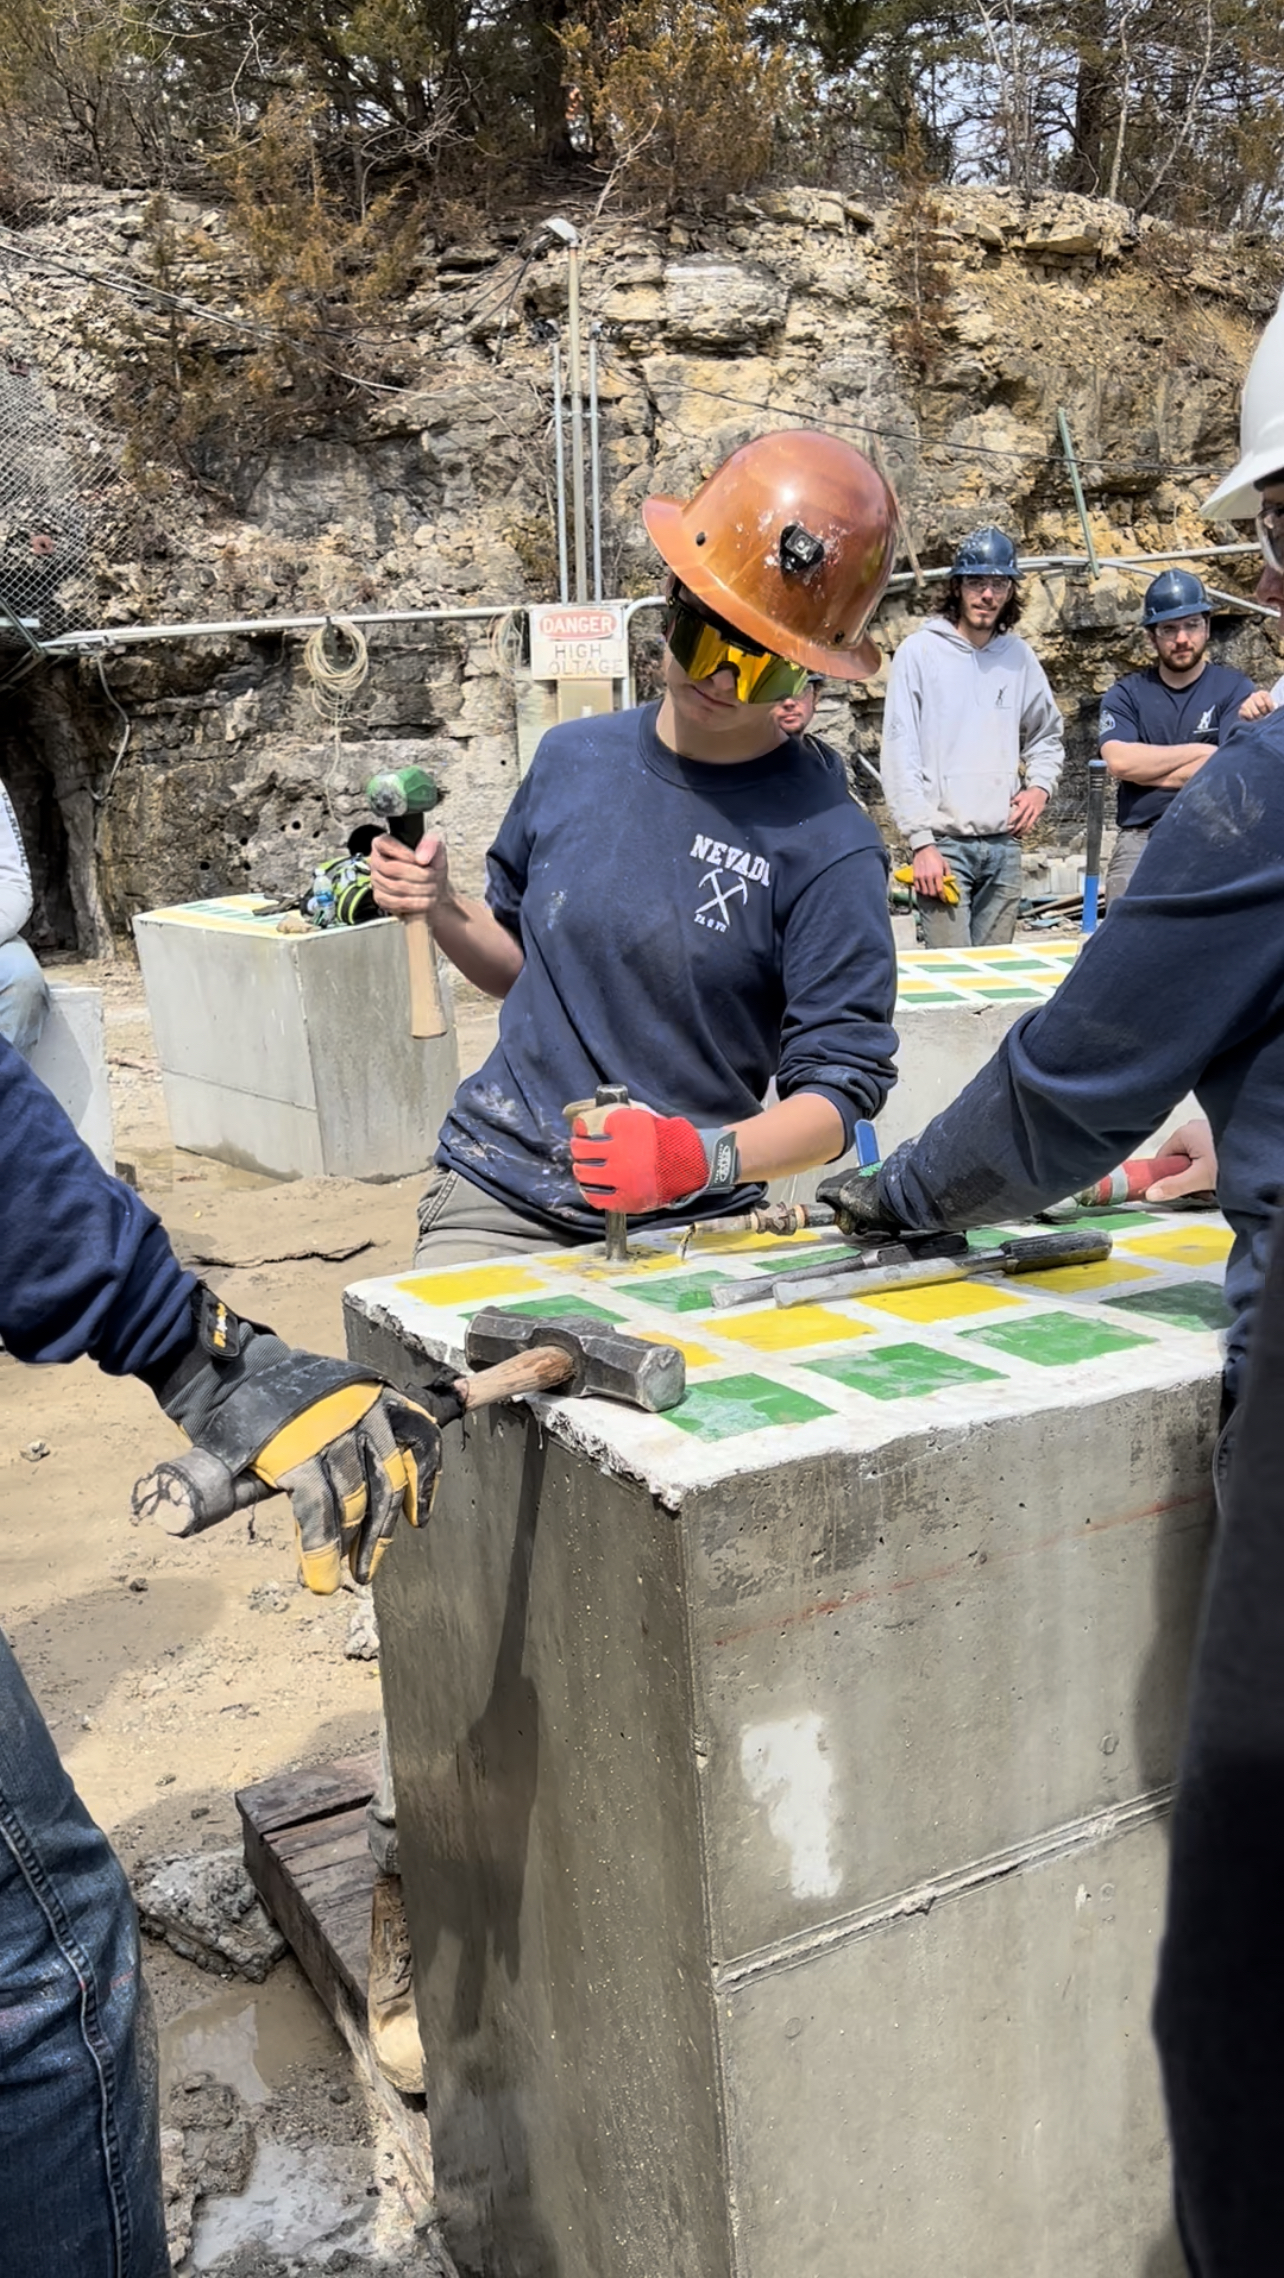 UNR students compete in annual Mining Games